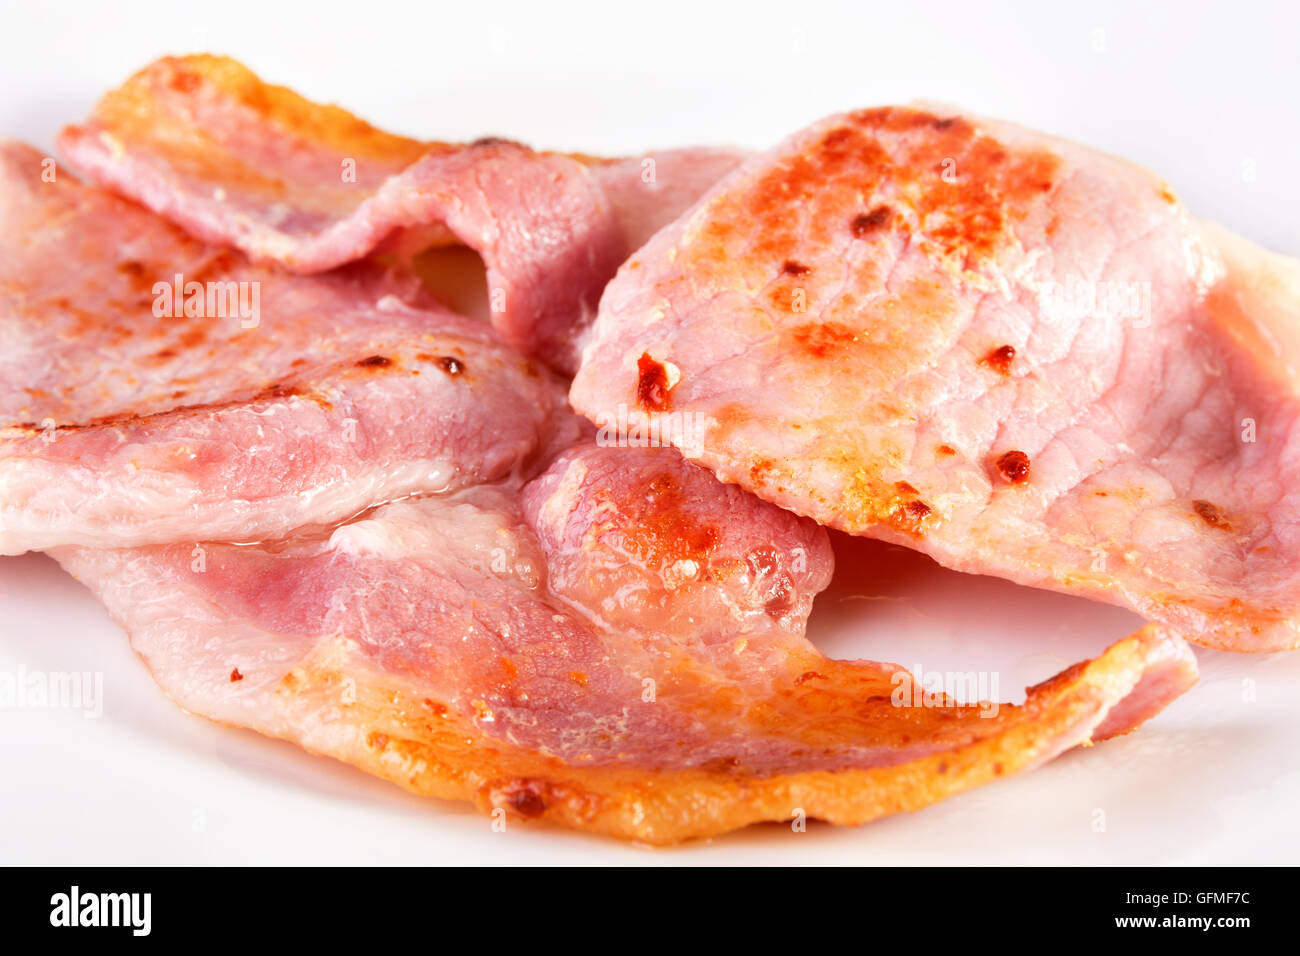 Fried bacon slices on a white plate. SDOF Stock Photo